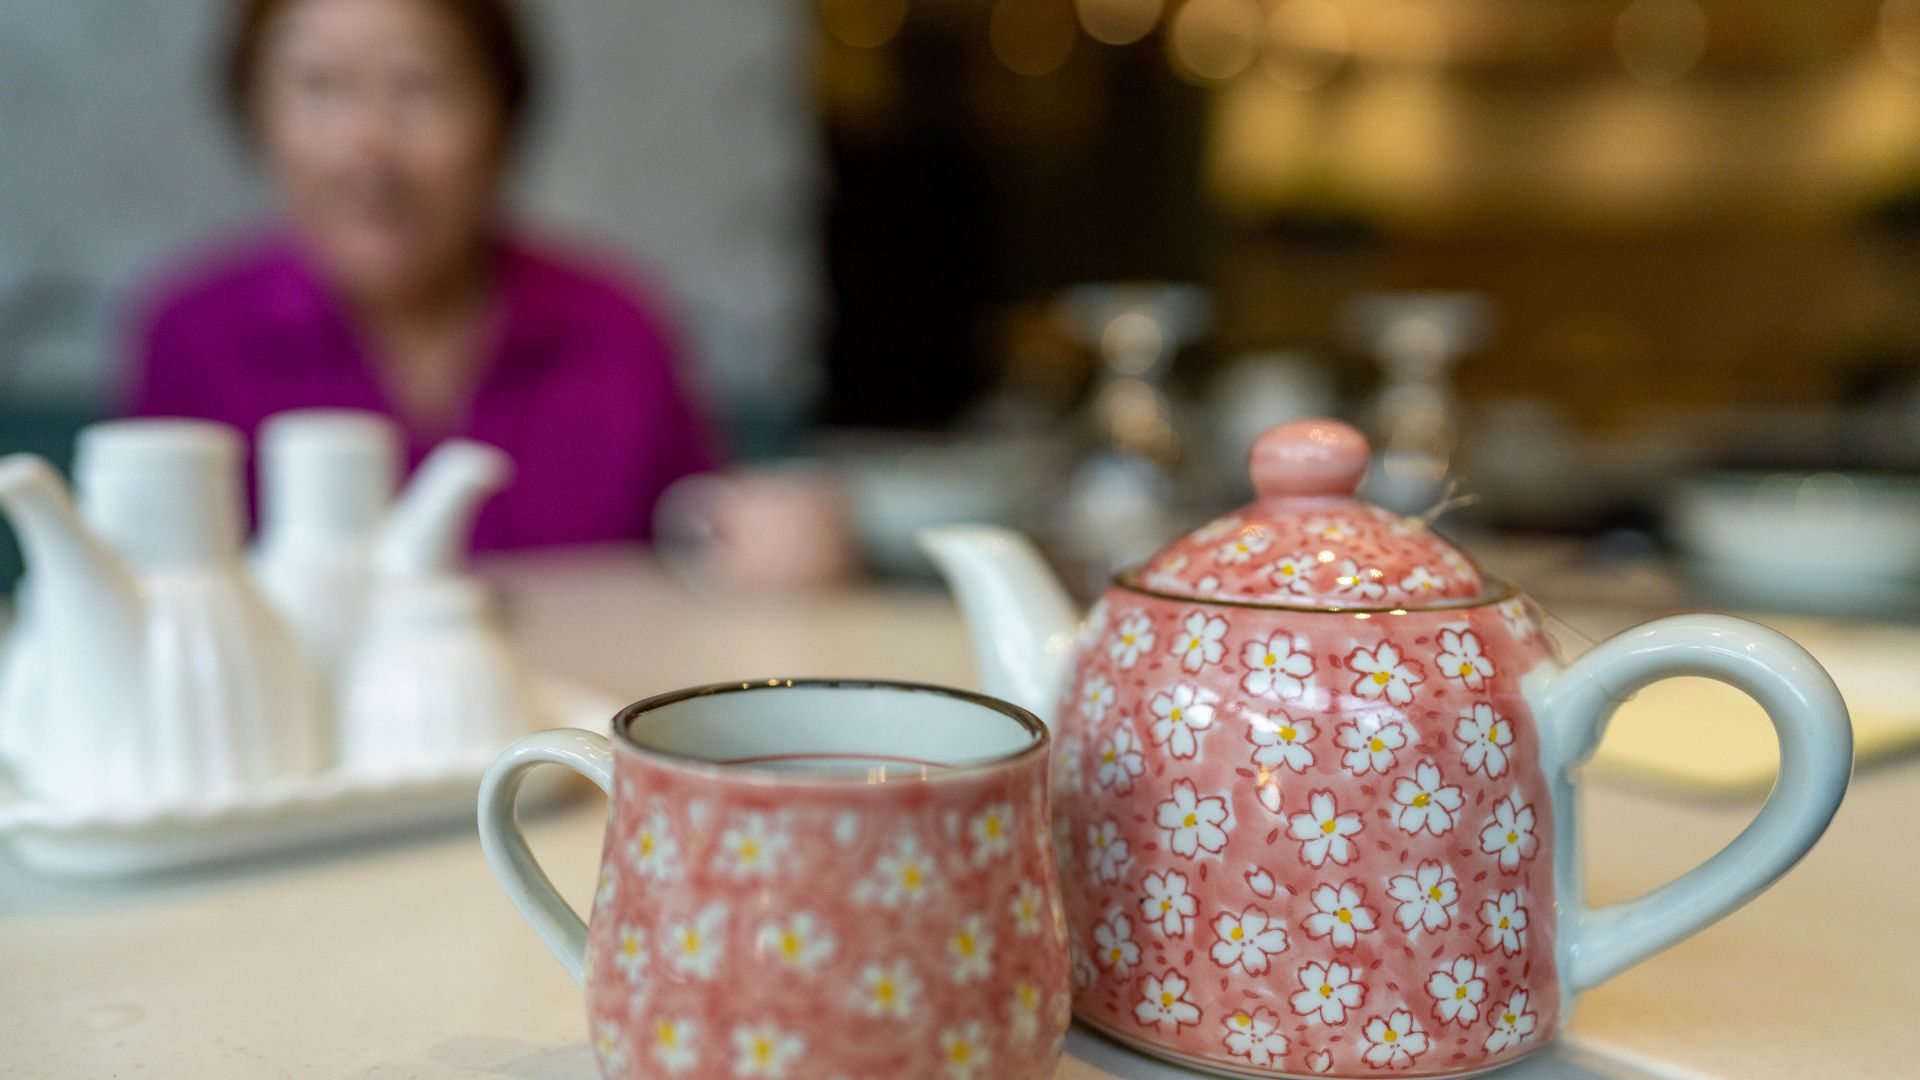 Pink teacup and teapot in the foreground, in the background is Ma Zhong Yan, slightly blurry